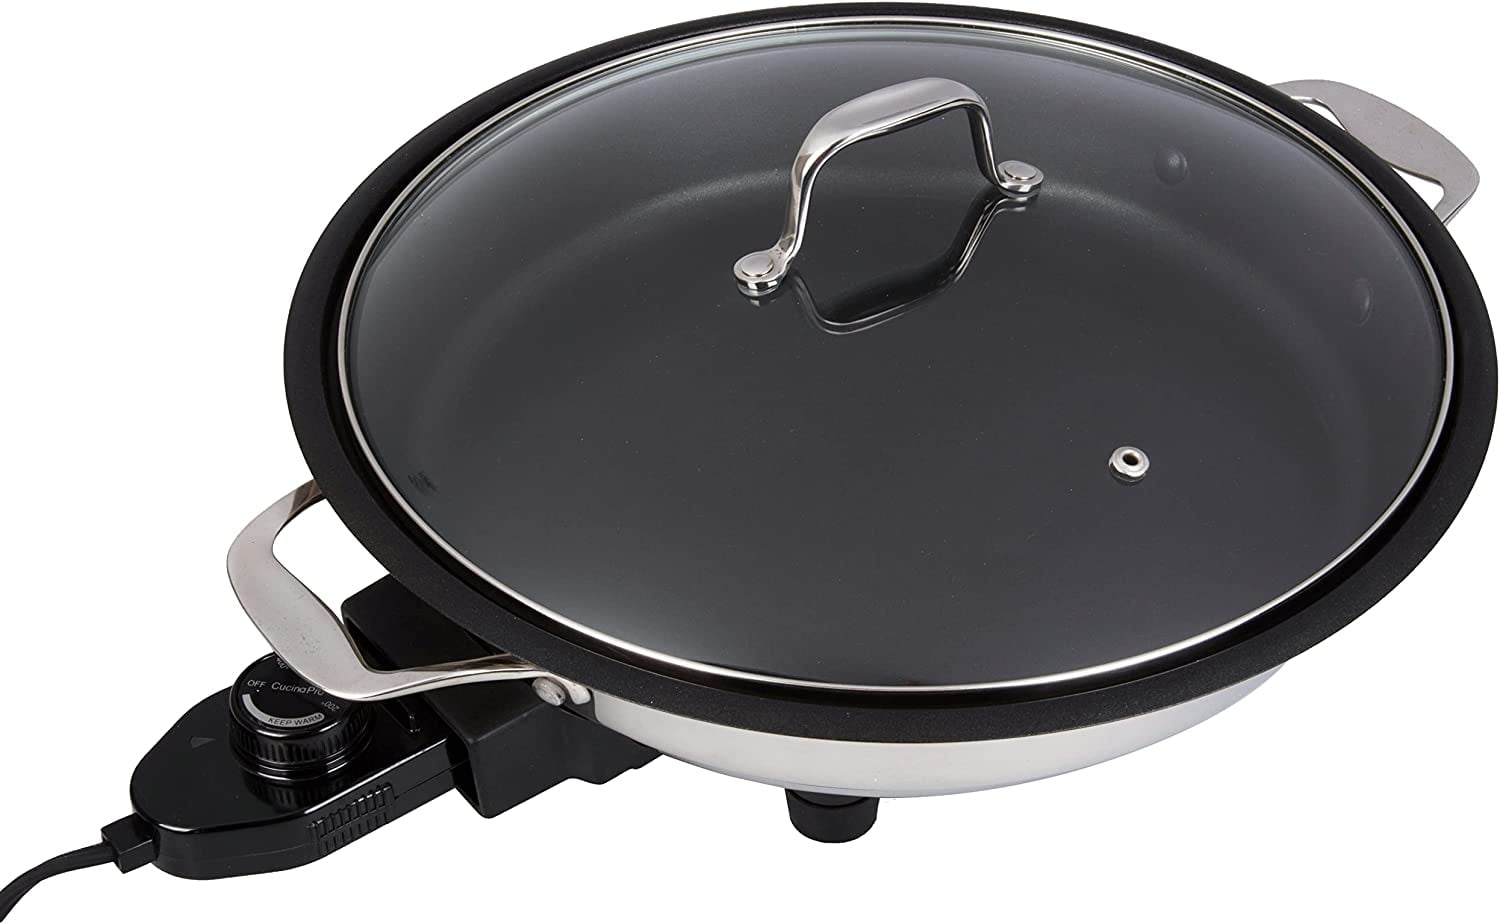  Electric Skillet Nonstick with Lids - 16 inch Extra Large Frying  Pan,Ceramic, Adjustable temperature, Cool Touch Handles, Nozaya: Home &  Kitchen